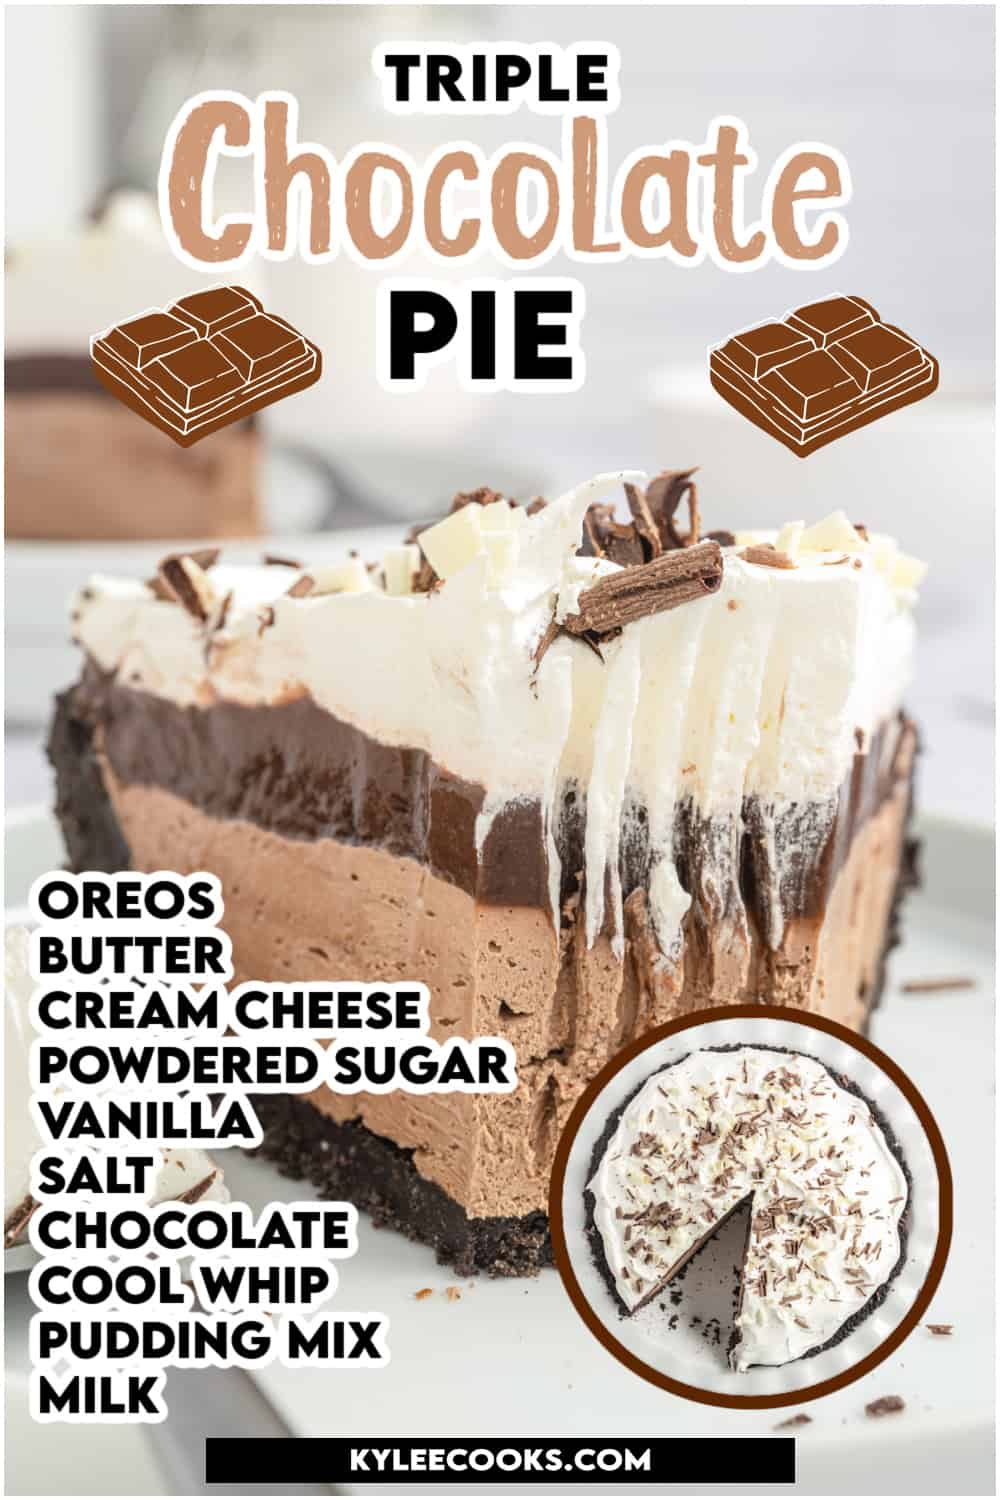 a slice of chocolate pie on a plate with recipe ingredients overlaid in text.